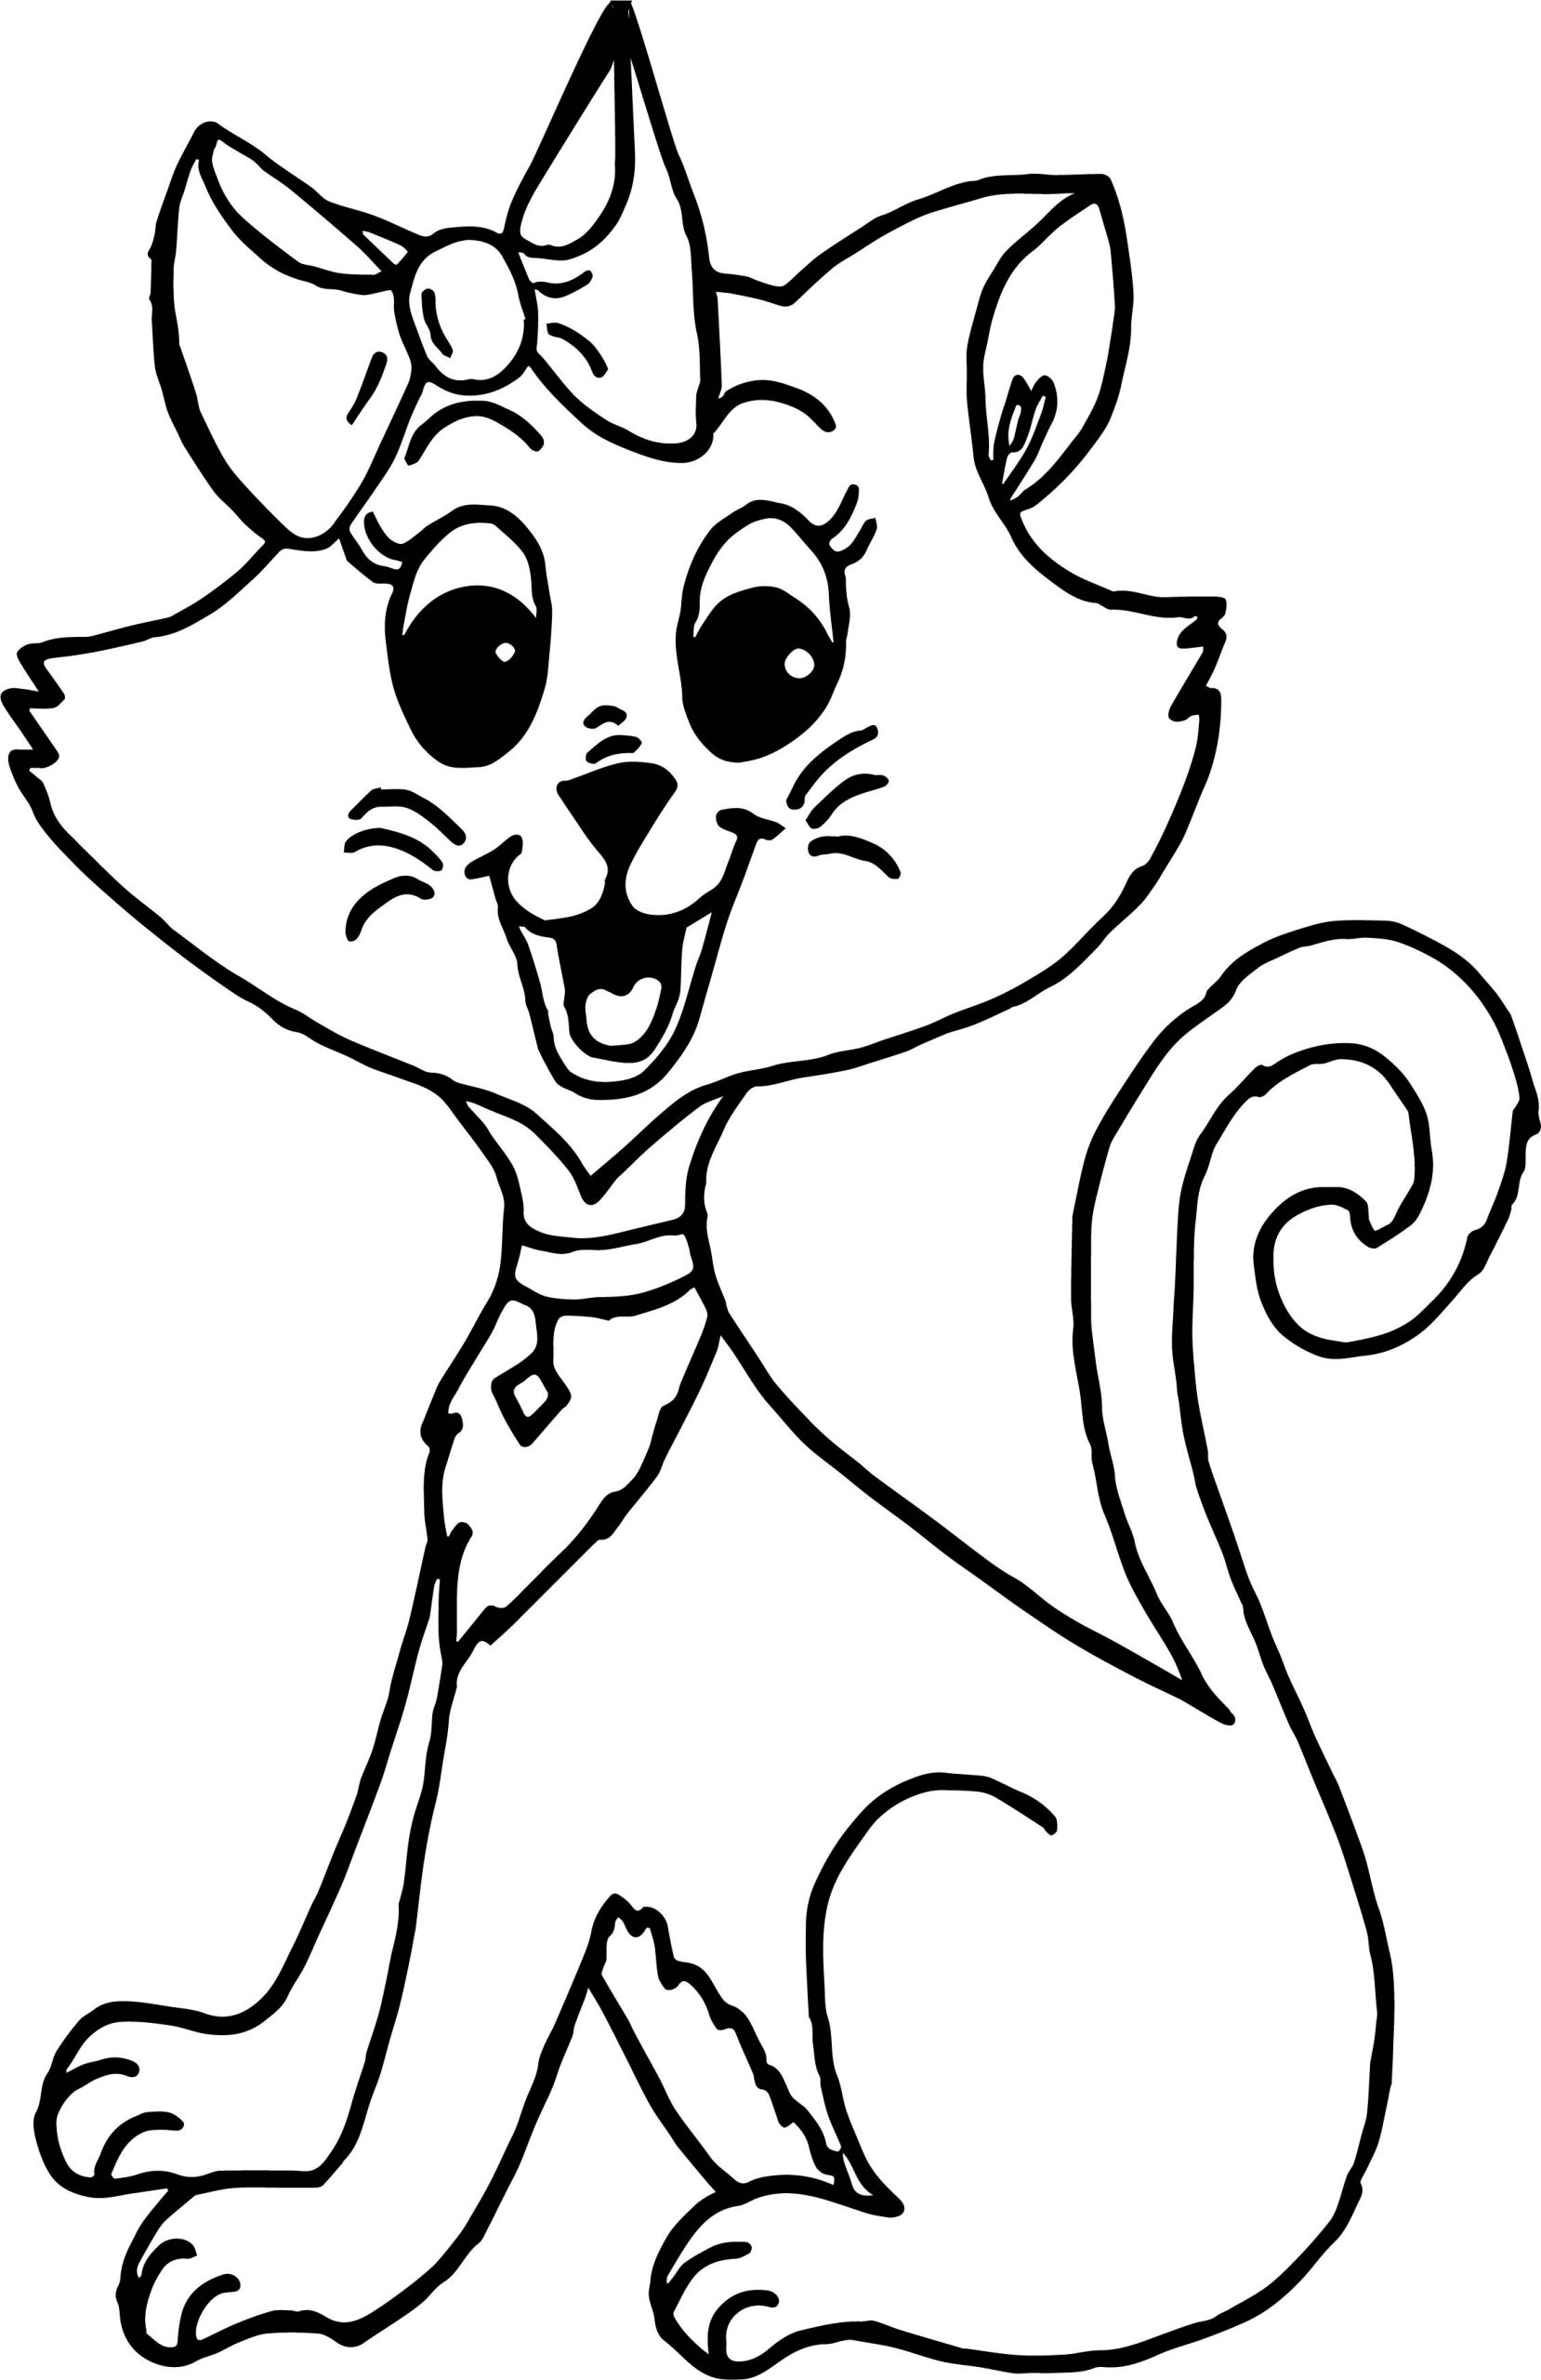 Cat Coloring Pages For Girls
 Cute Girl Cat Coloring Page